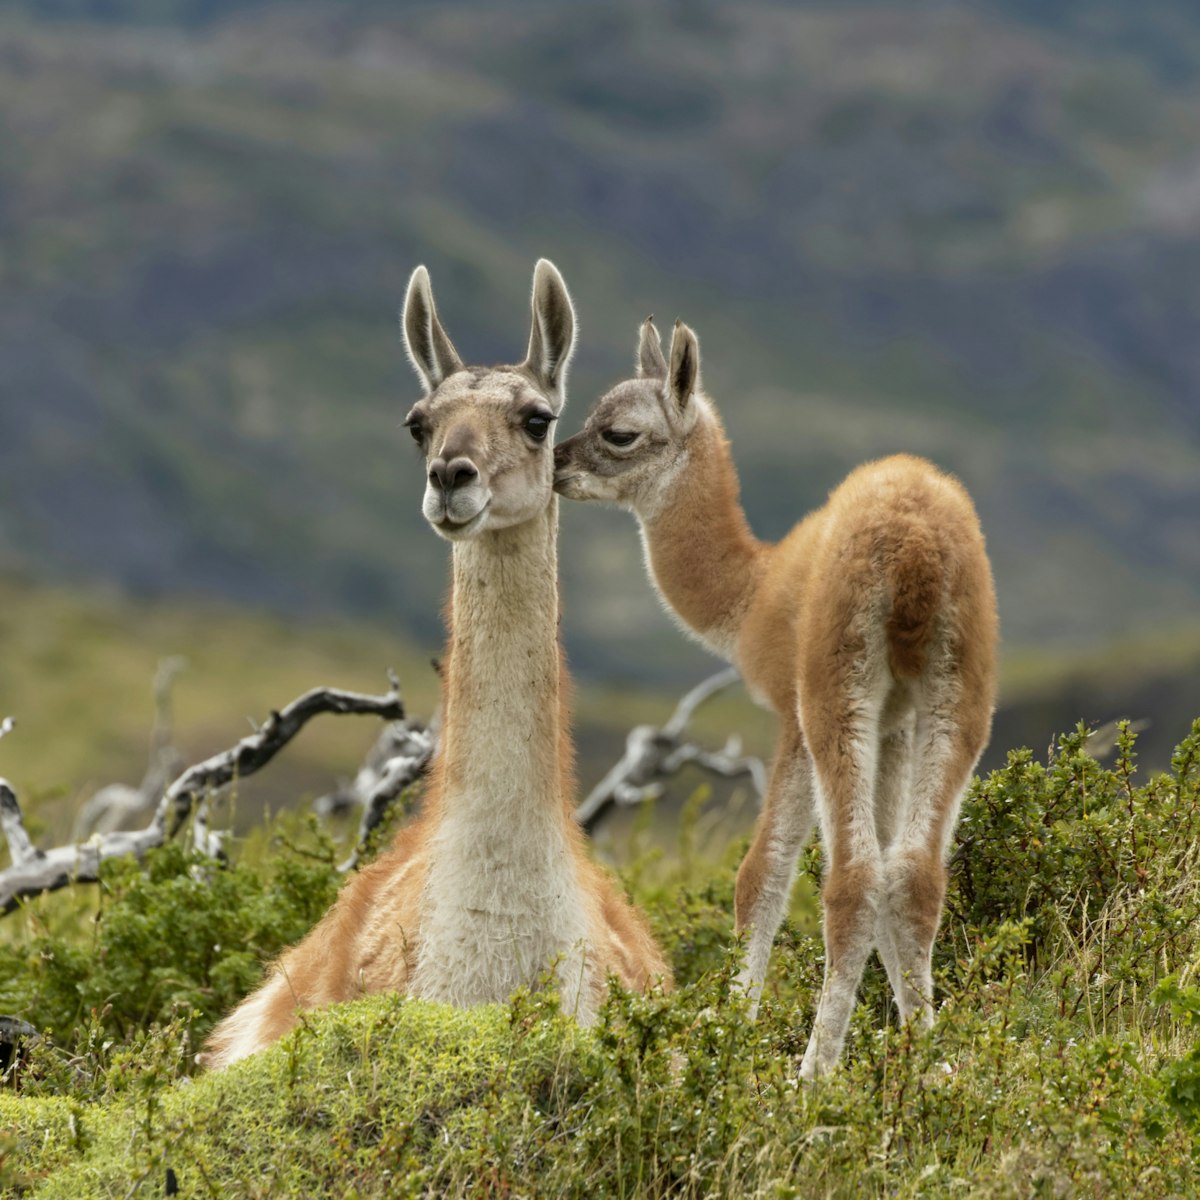 The guanaco (Lama guanicoe), a camelid native to South America, stands between 1.0 and 1.2 m at the shoulder and weighs 90 to 140 kg. Its color varies very little (unlike the domestic llama), ranging from a light brown to dark cinnamon and shading to white underneath. Guanacos have grey faces and small, straight ears. The name guanaco comes from the South American Quechua word huanaco (modern spelling: wanaku). Young guanacos are called chulengos.